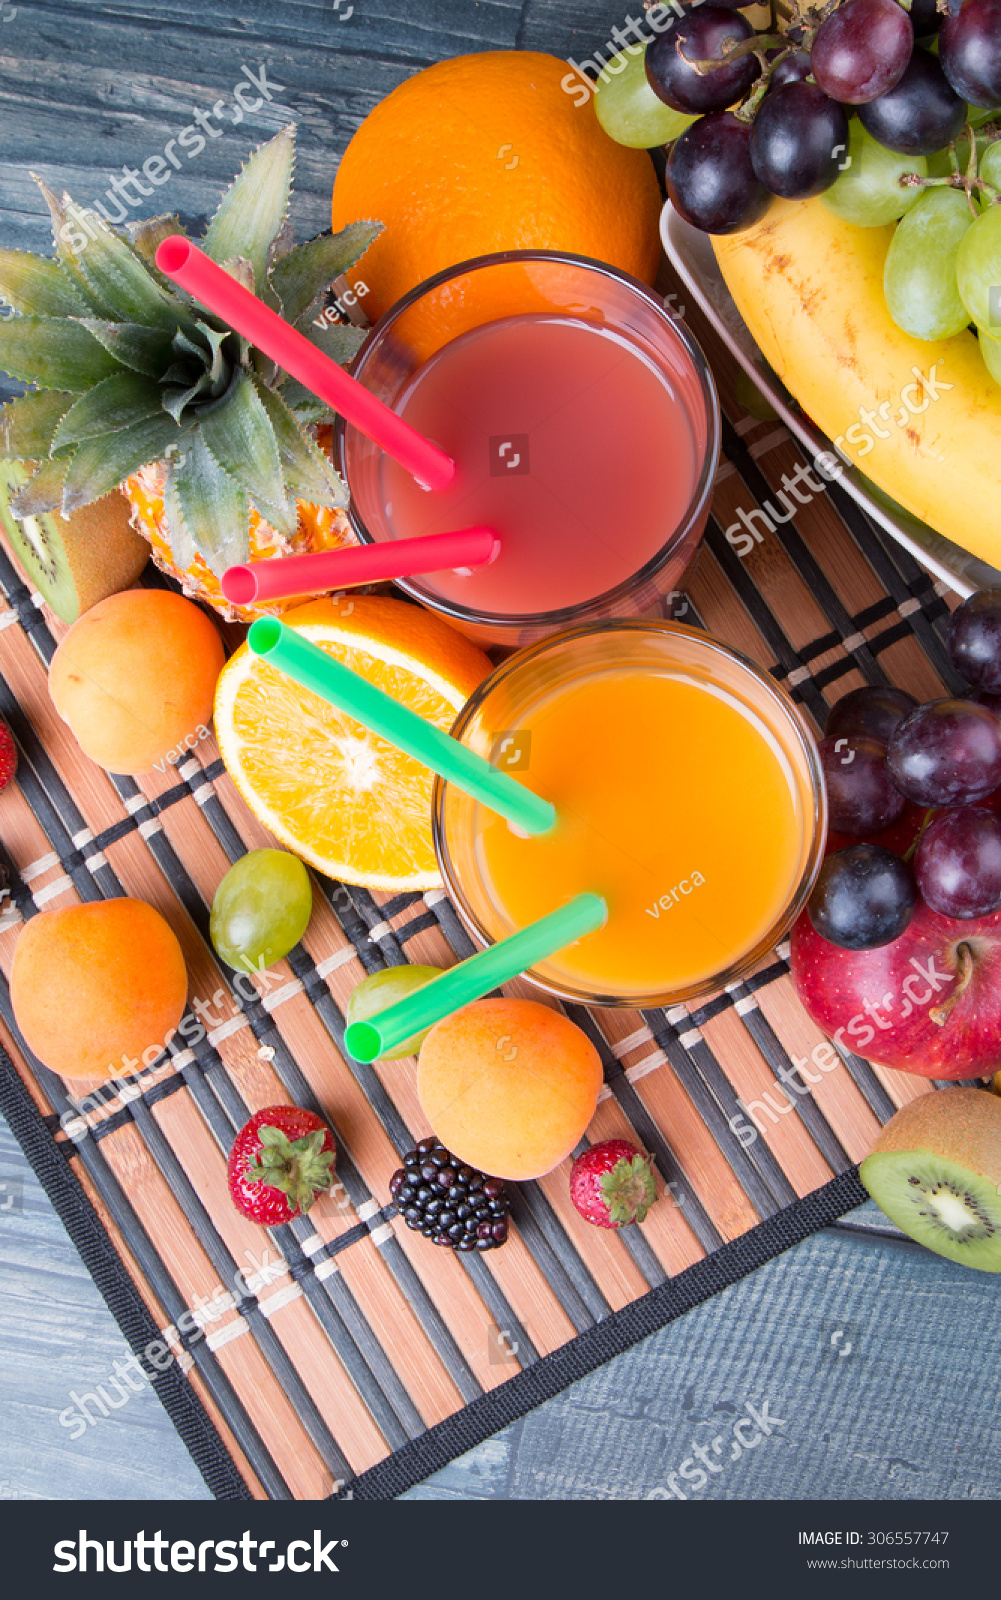 Breakfast concept with orange and strawberry juice, coffee, fruits on wooden table #306557747